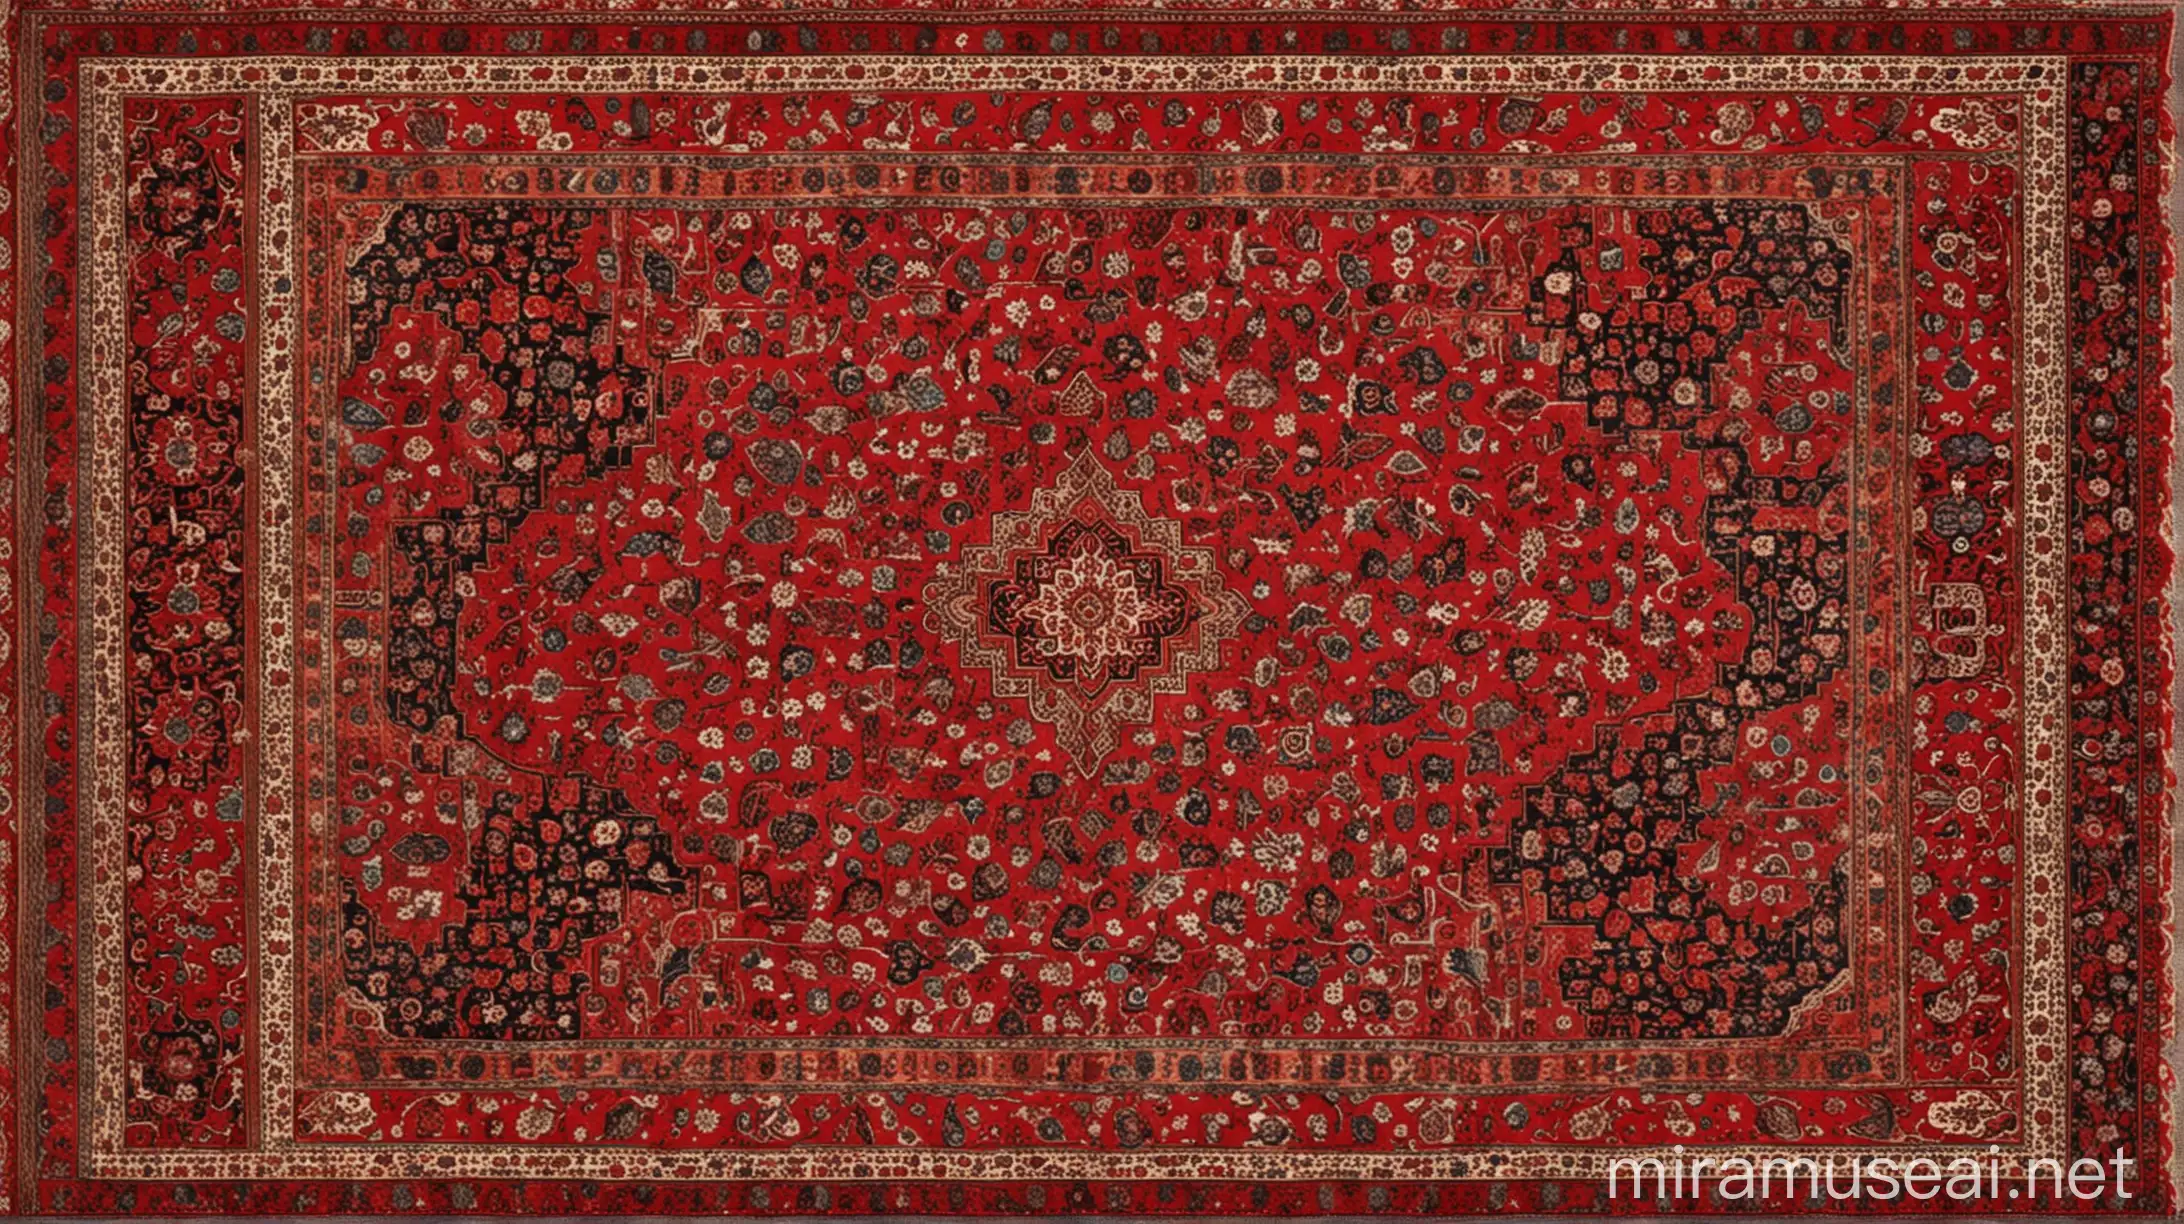 Traditional Persian Carpet with Red Floral Patterns